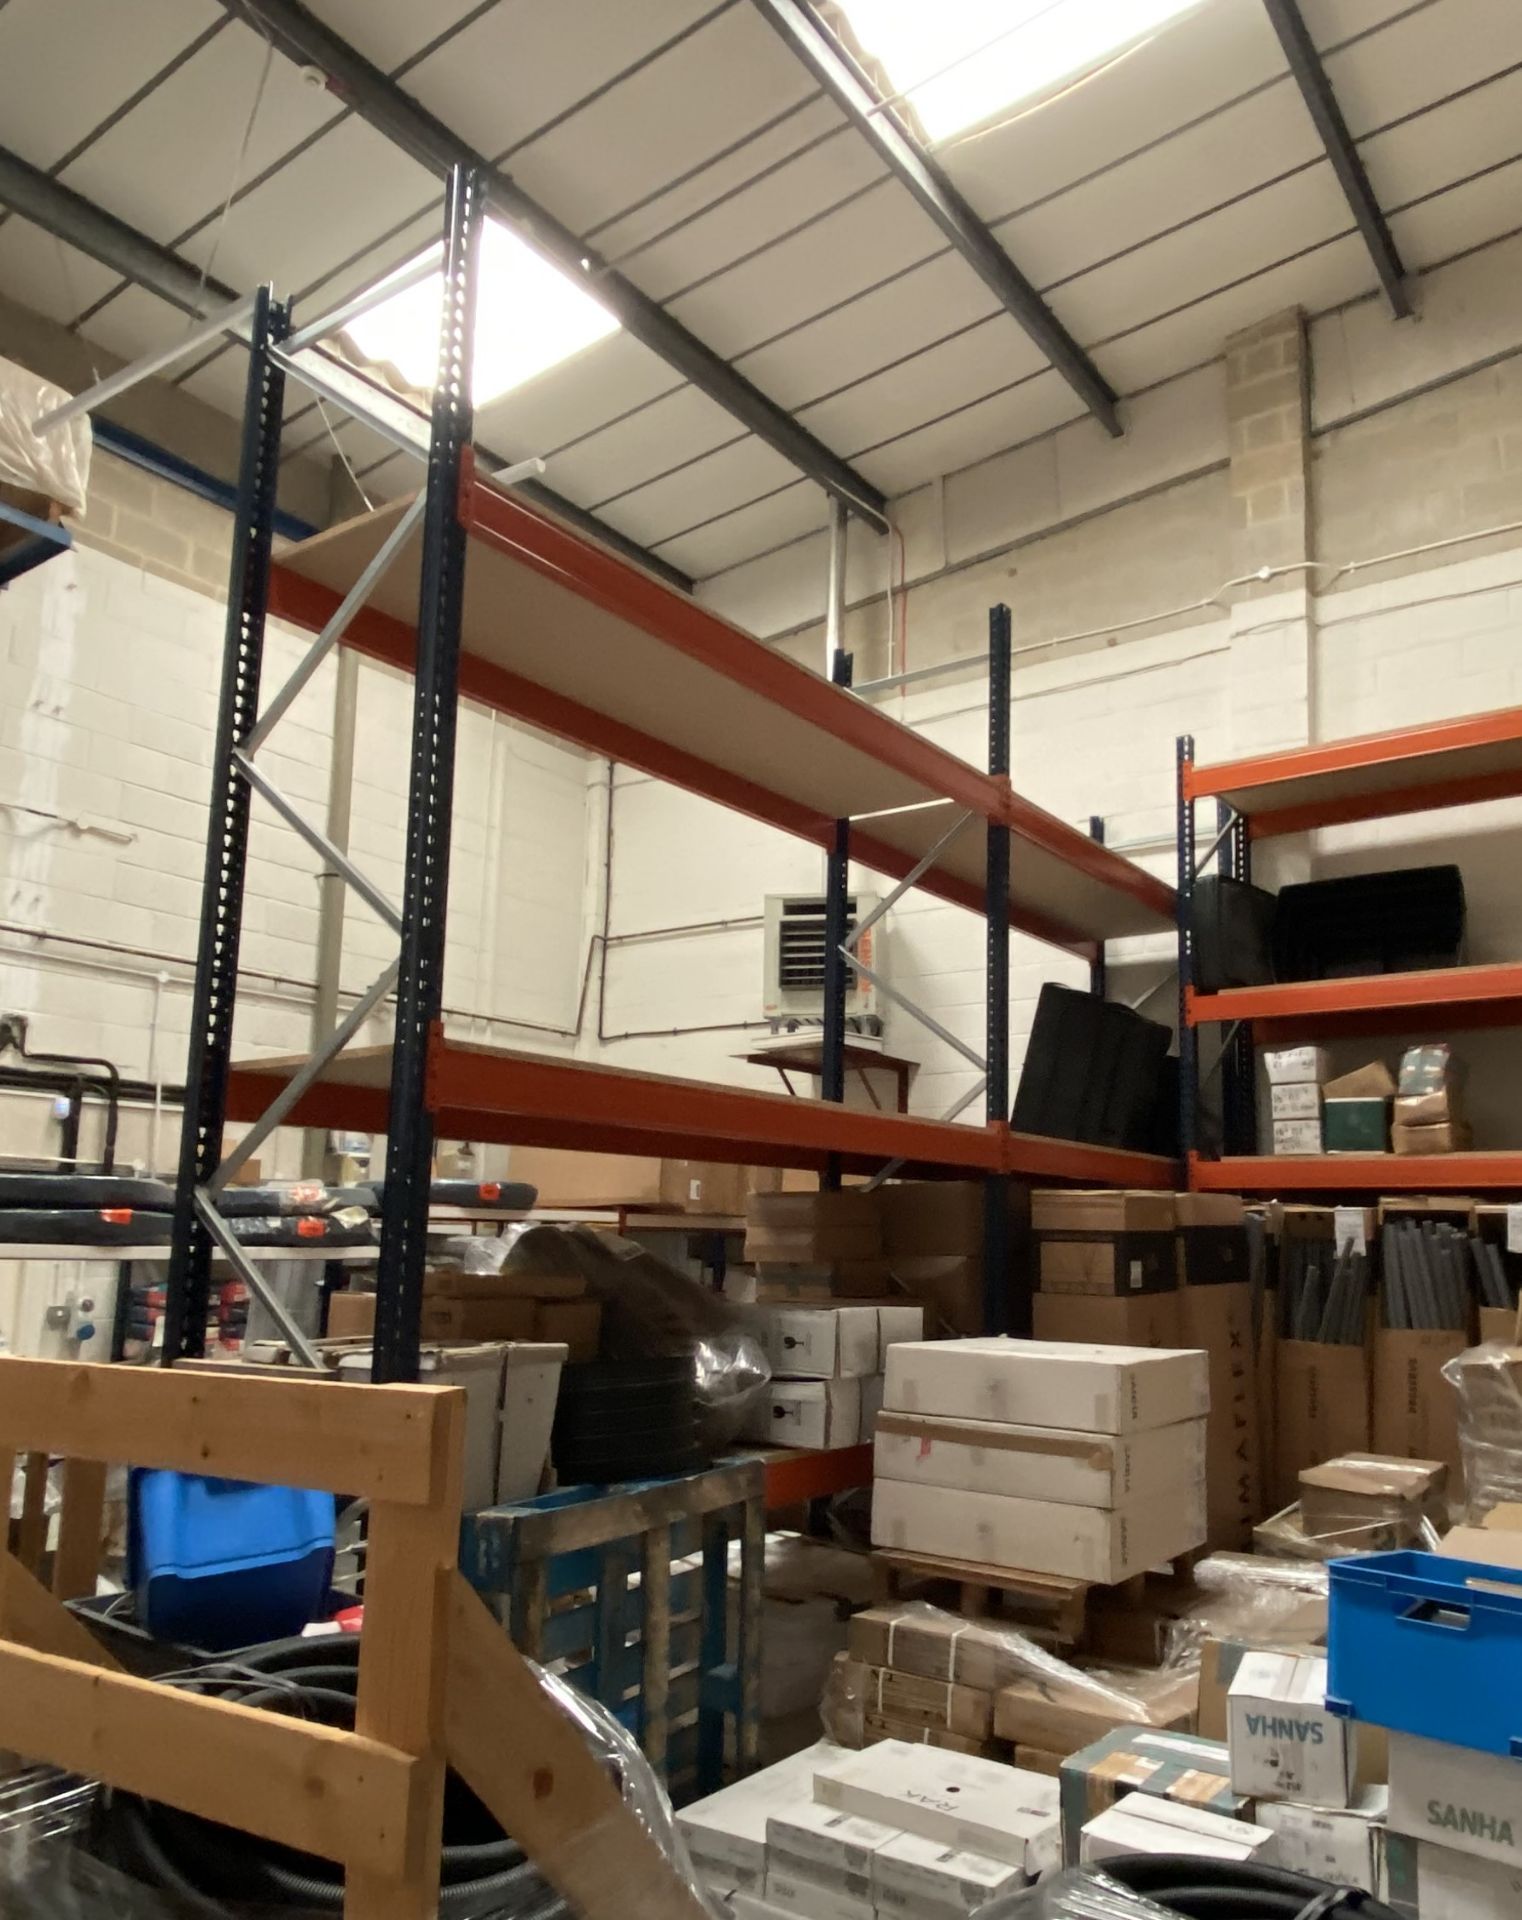 2 Bays of adjustable boltless pallet racking, approx 2.4m w x 5m h (excludes contents)